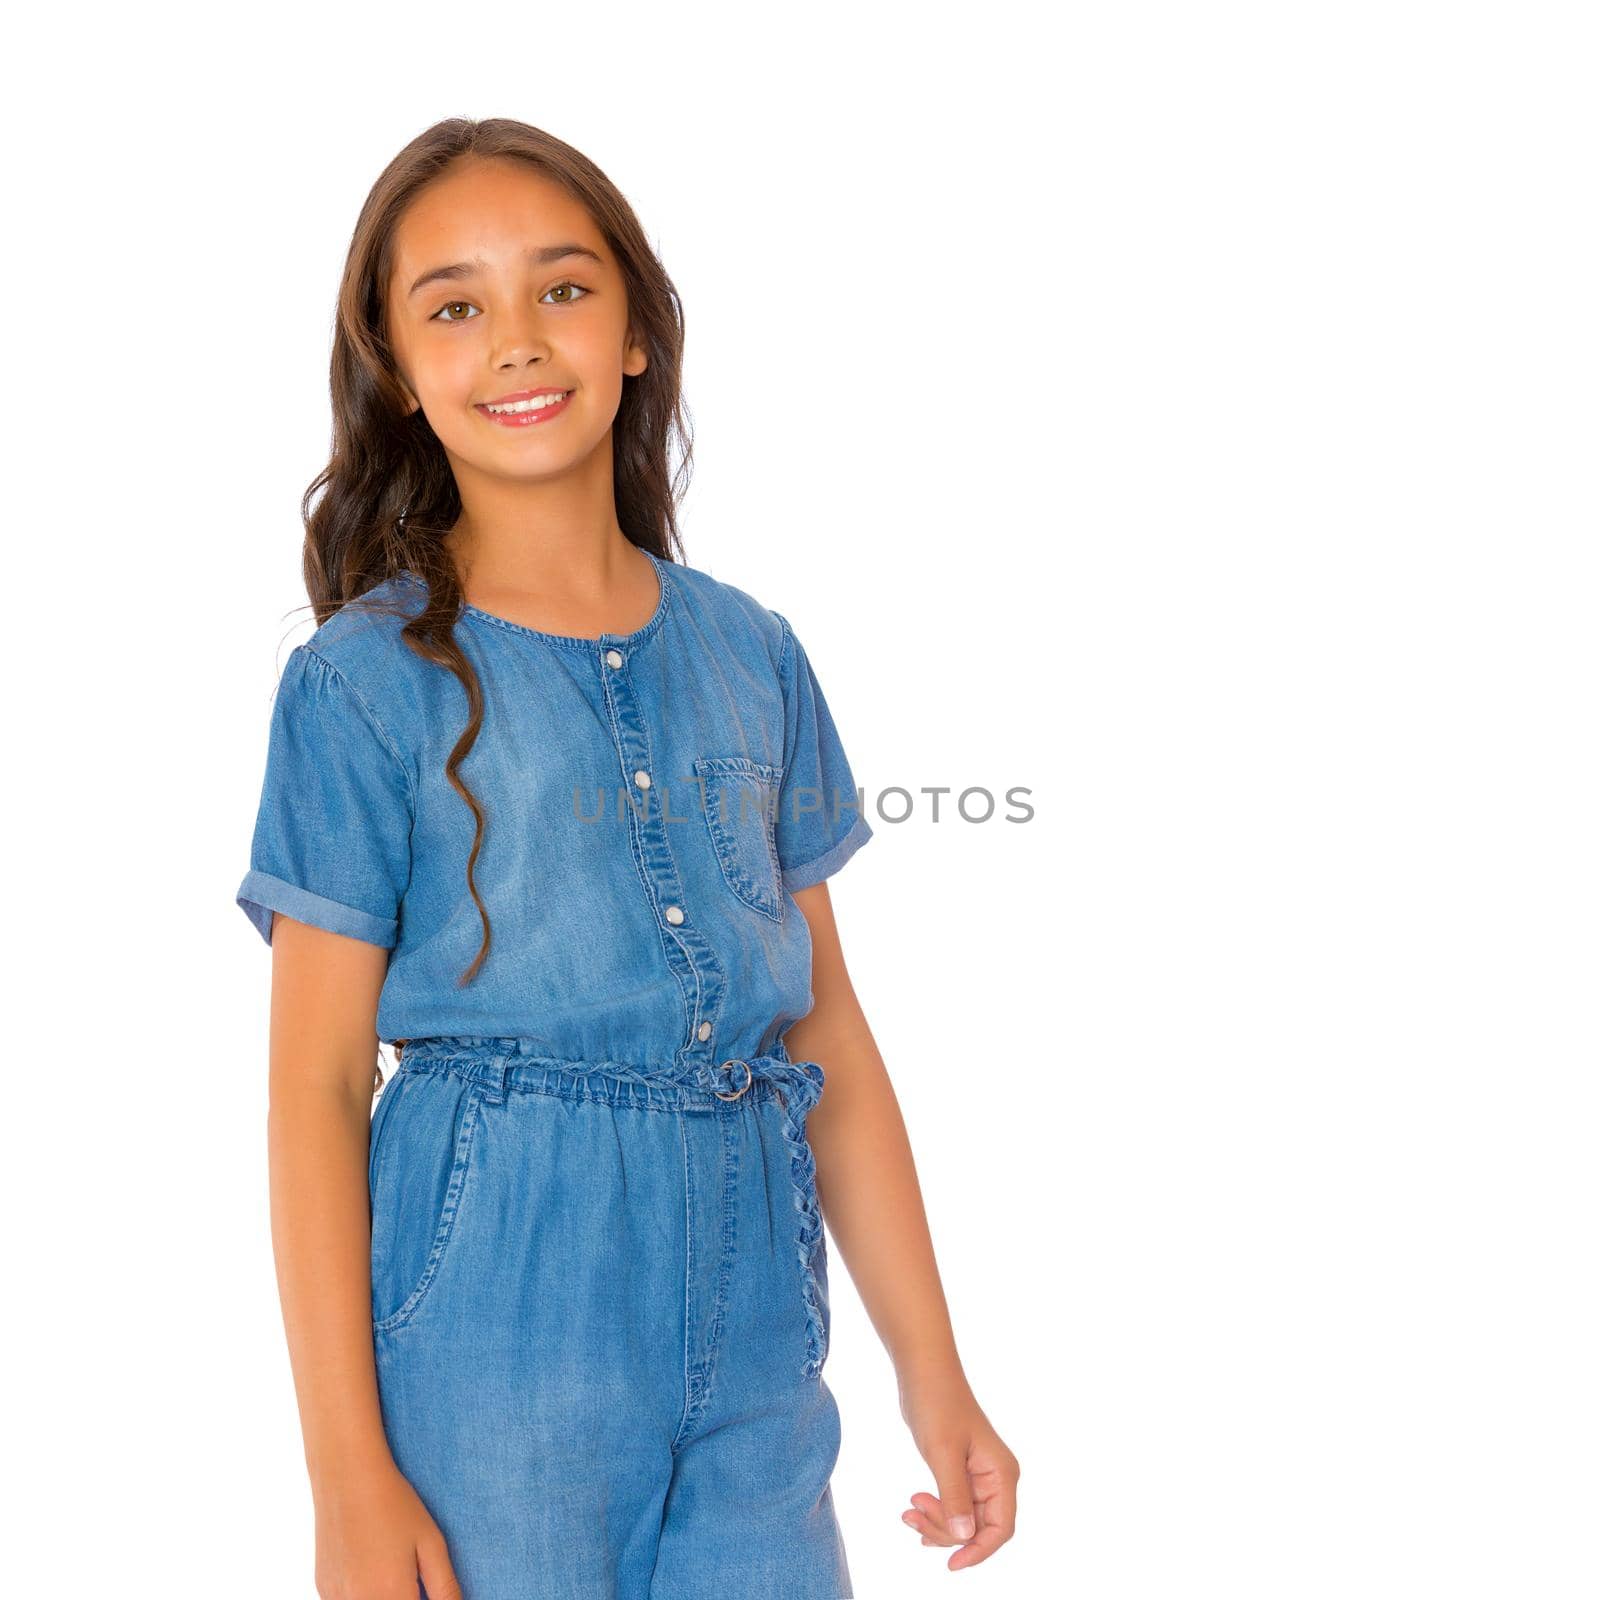 Portrait of a beautiful asian teenage girl with long black hair, in denim overalls. The concept of advertising a healthy lifestyle, beauty and fashion. Isolated on white background.